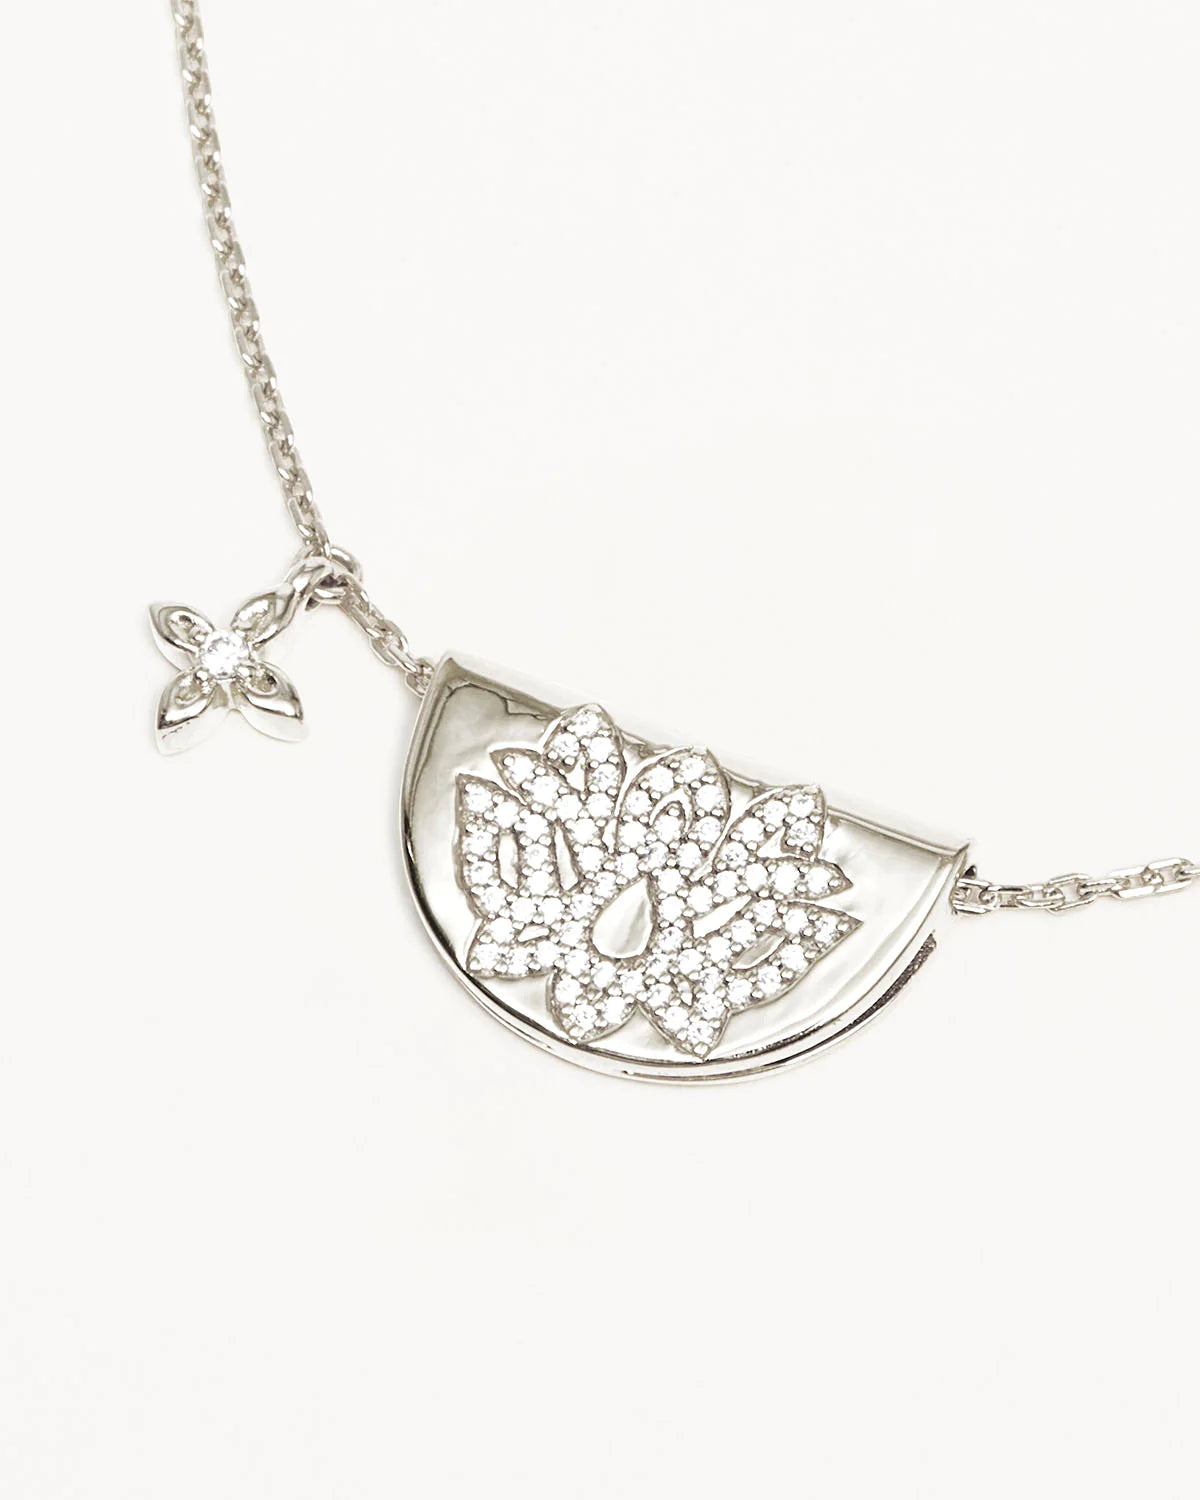 Live in Light Lotus Necklace - Sterling Silver